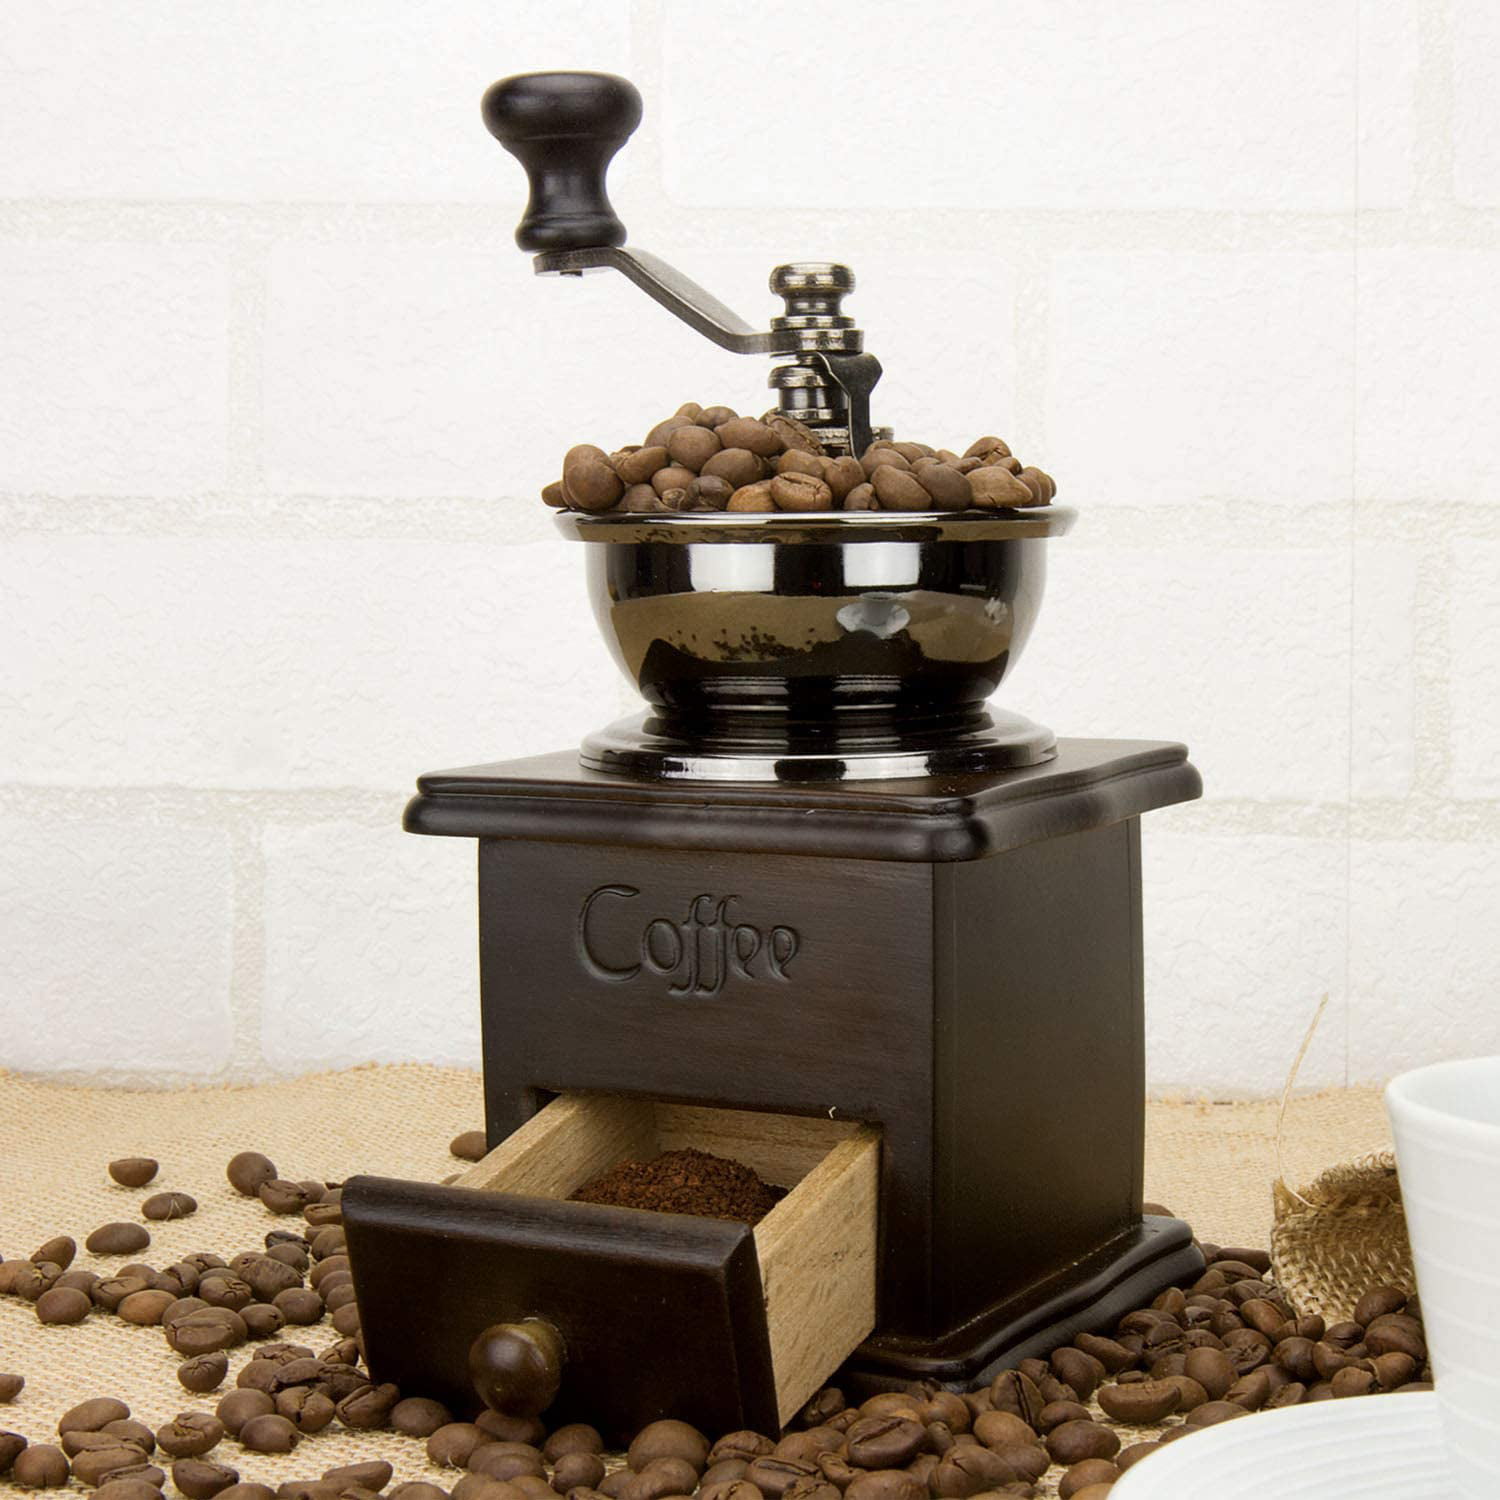 ruanxiangdong Manual Coffee Grinder Hand Coffee Mill Wooden Base with Drawer Coffee Bean Mill Vintage Antique Style Hand Crank